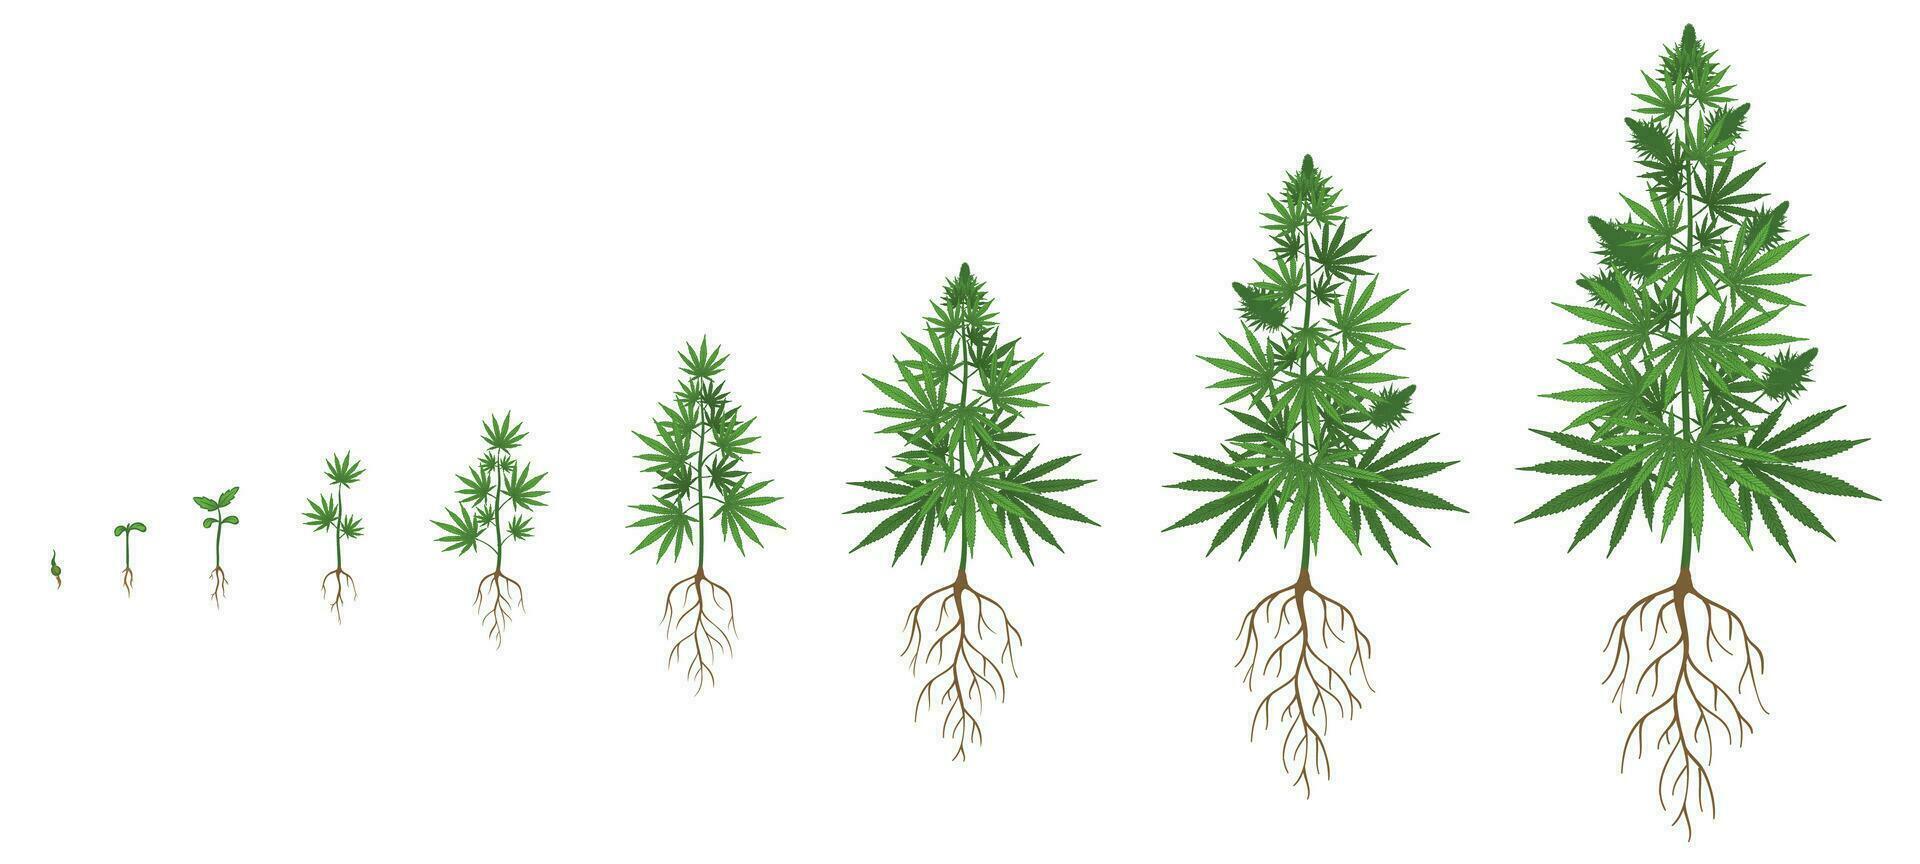 Hemp plant growth cycle. Cannabis cultivation, planting marijuana seeds and hemps plants stages of growth vector illustration